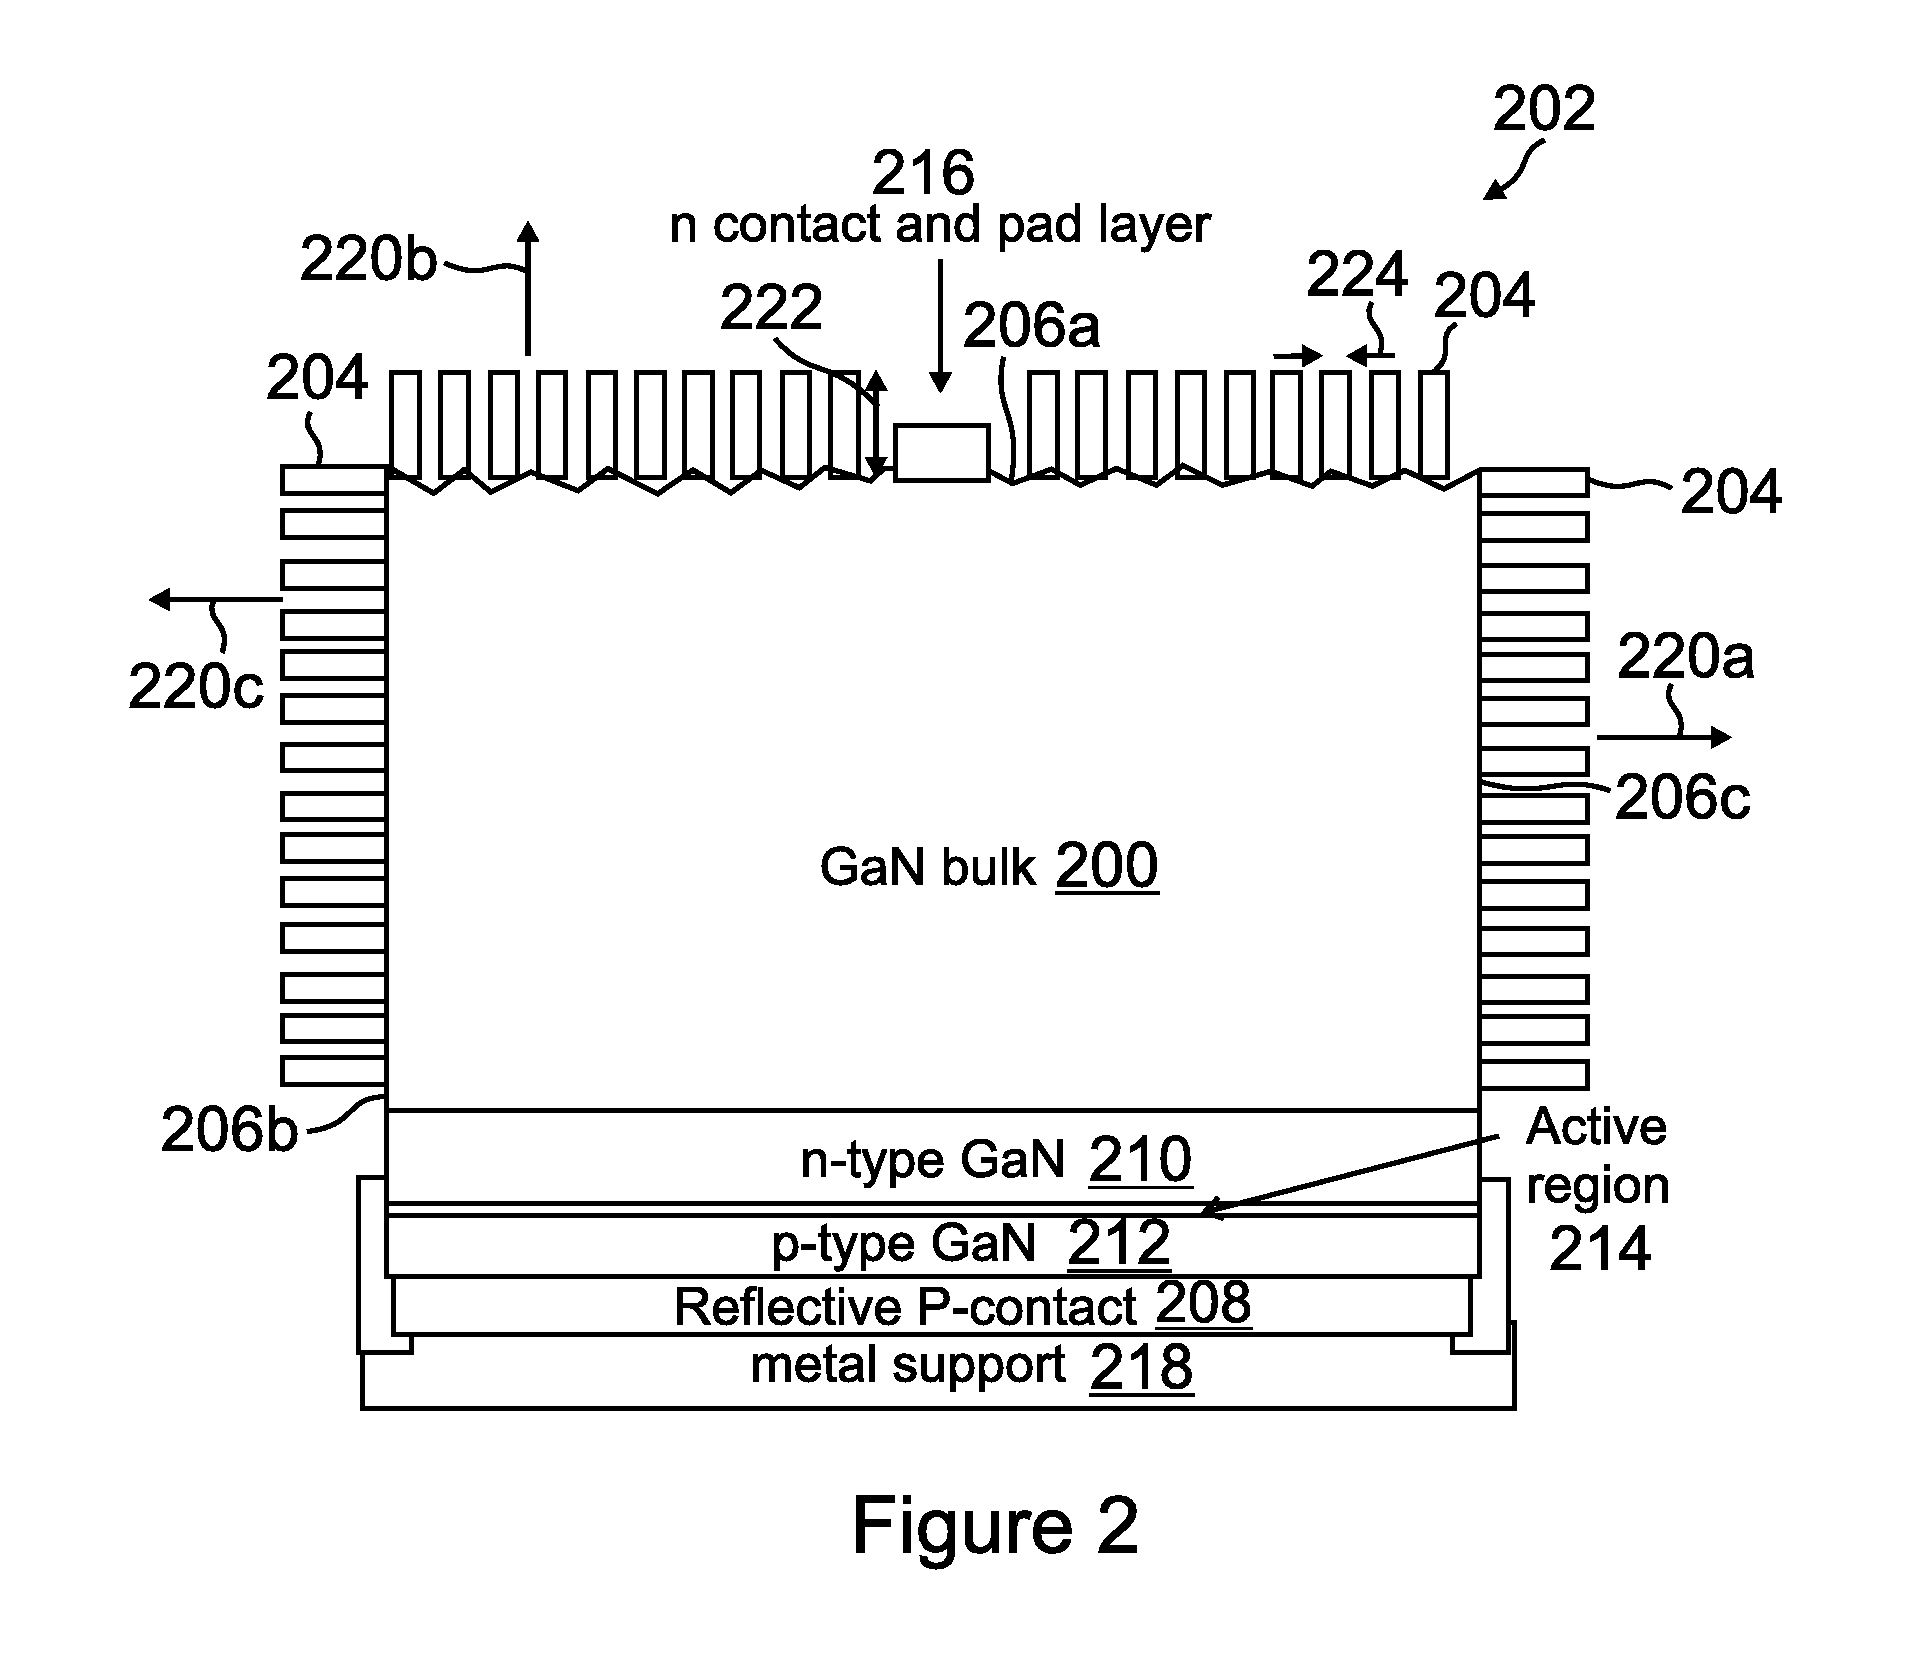 Light emitting diode structure utilizing zinc oxide nanorod arrays on one or more surfaces, and a low cost method of producing such zinc oxide nanorod arrays